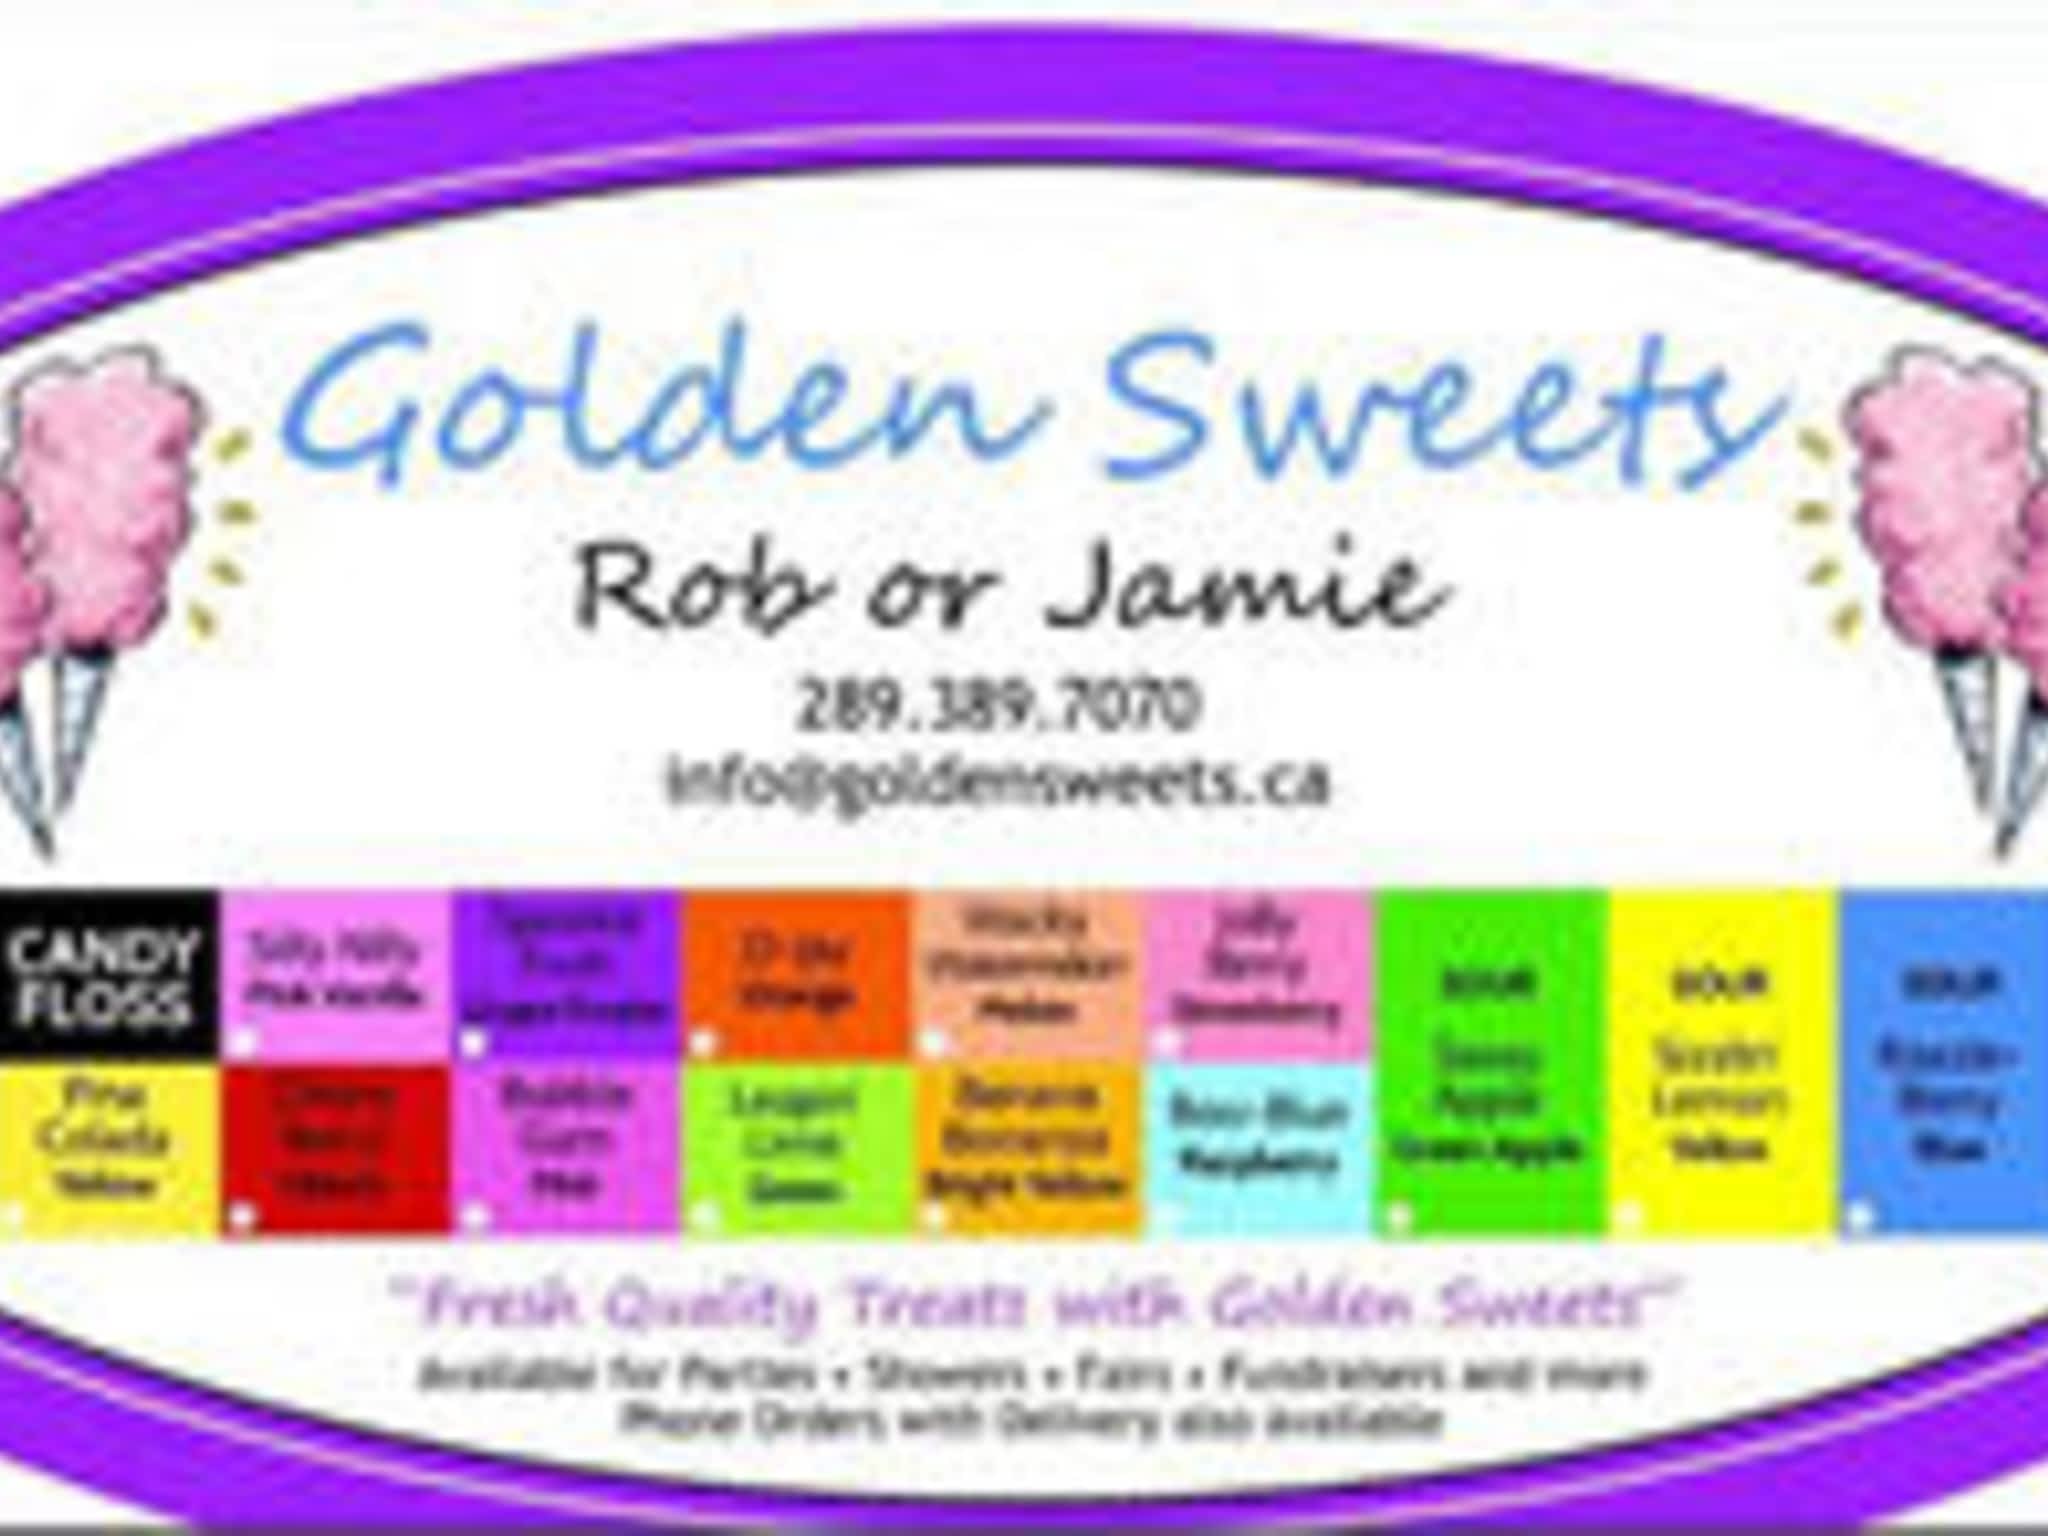 photo Golden Sweets